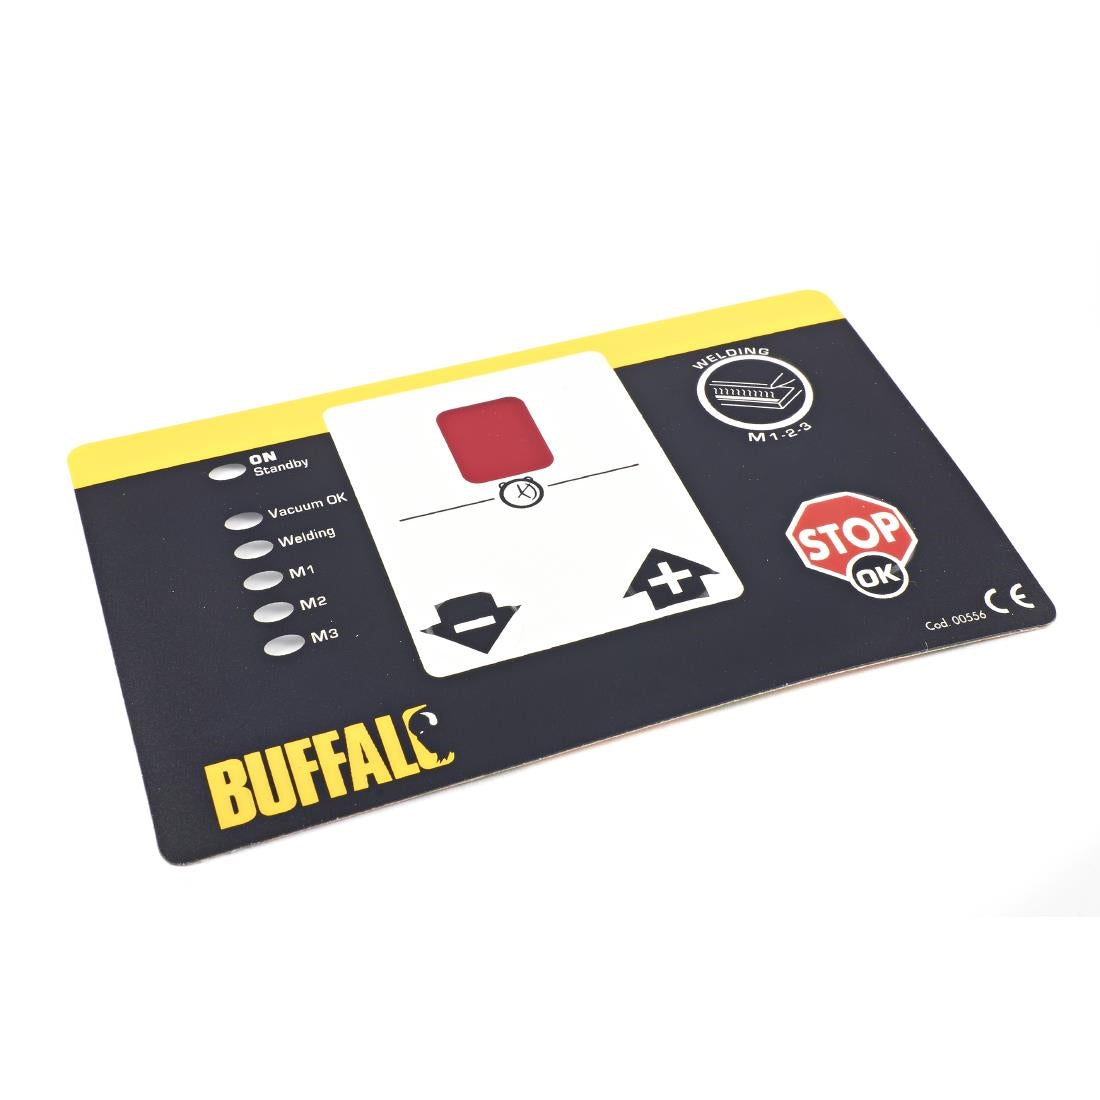 Control Panel Adhesive Label for Buffalo Vac Pack Machine JD Catering Equipment Solutions Ltd